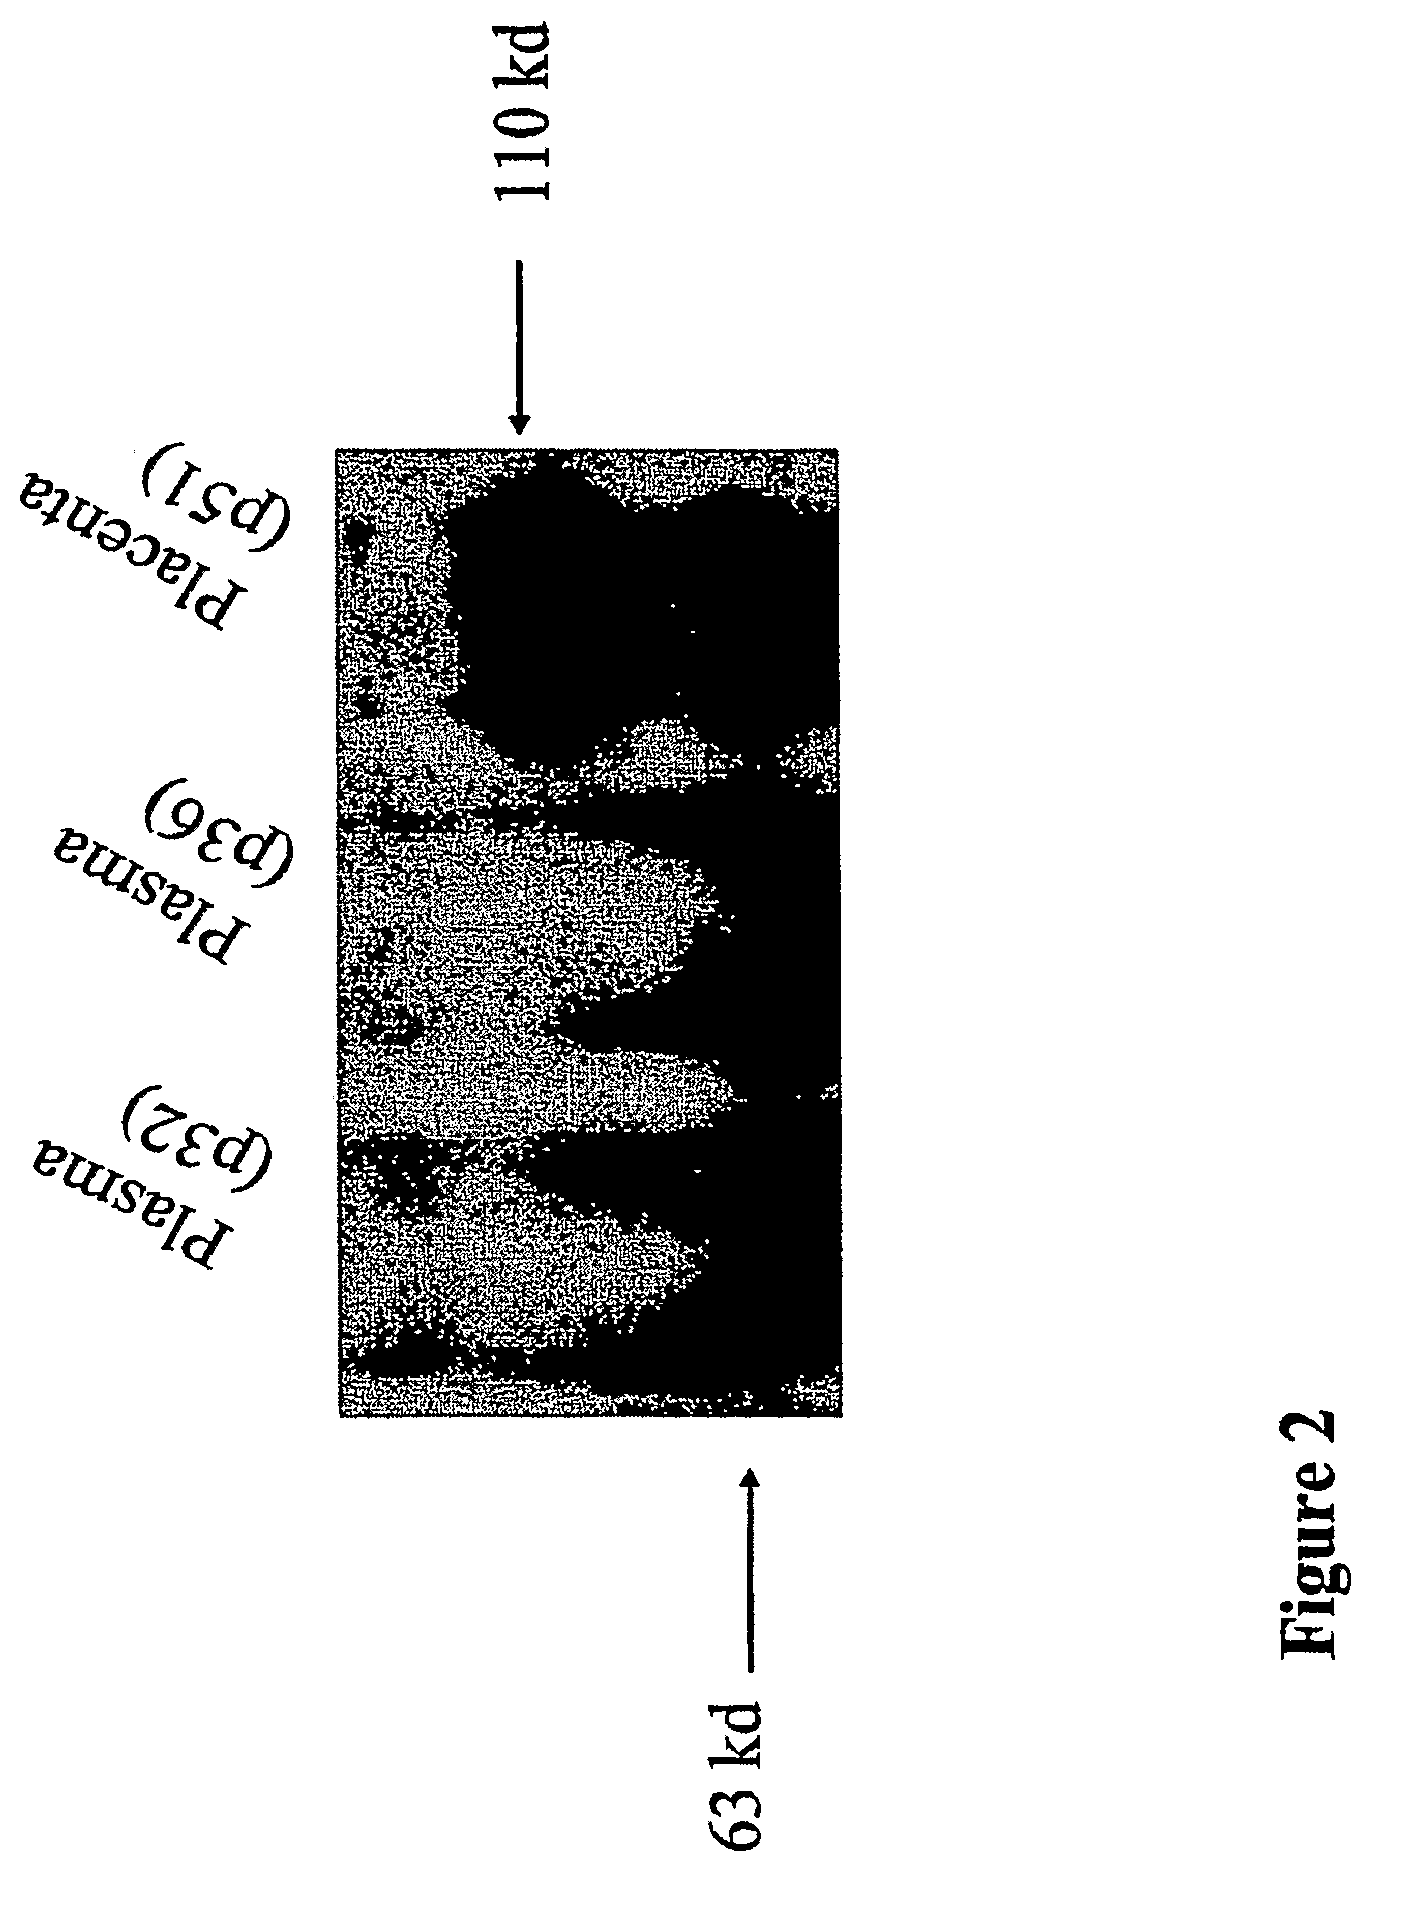 Soluble Endoglin Compounds for the Treatment and Prevention of Cancer